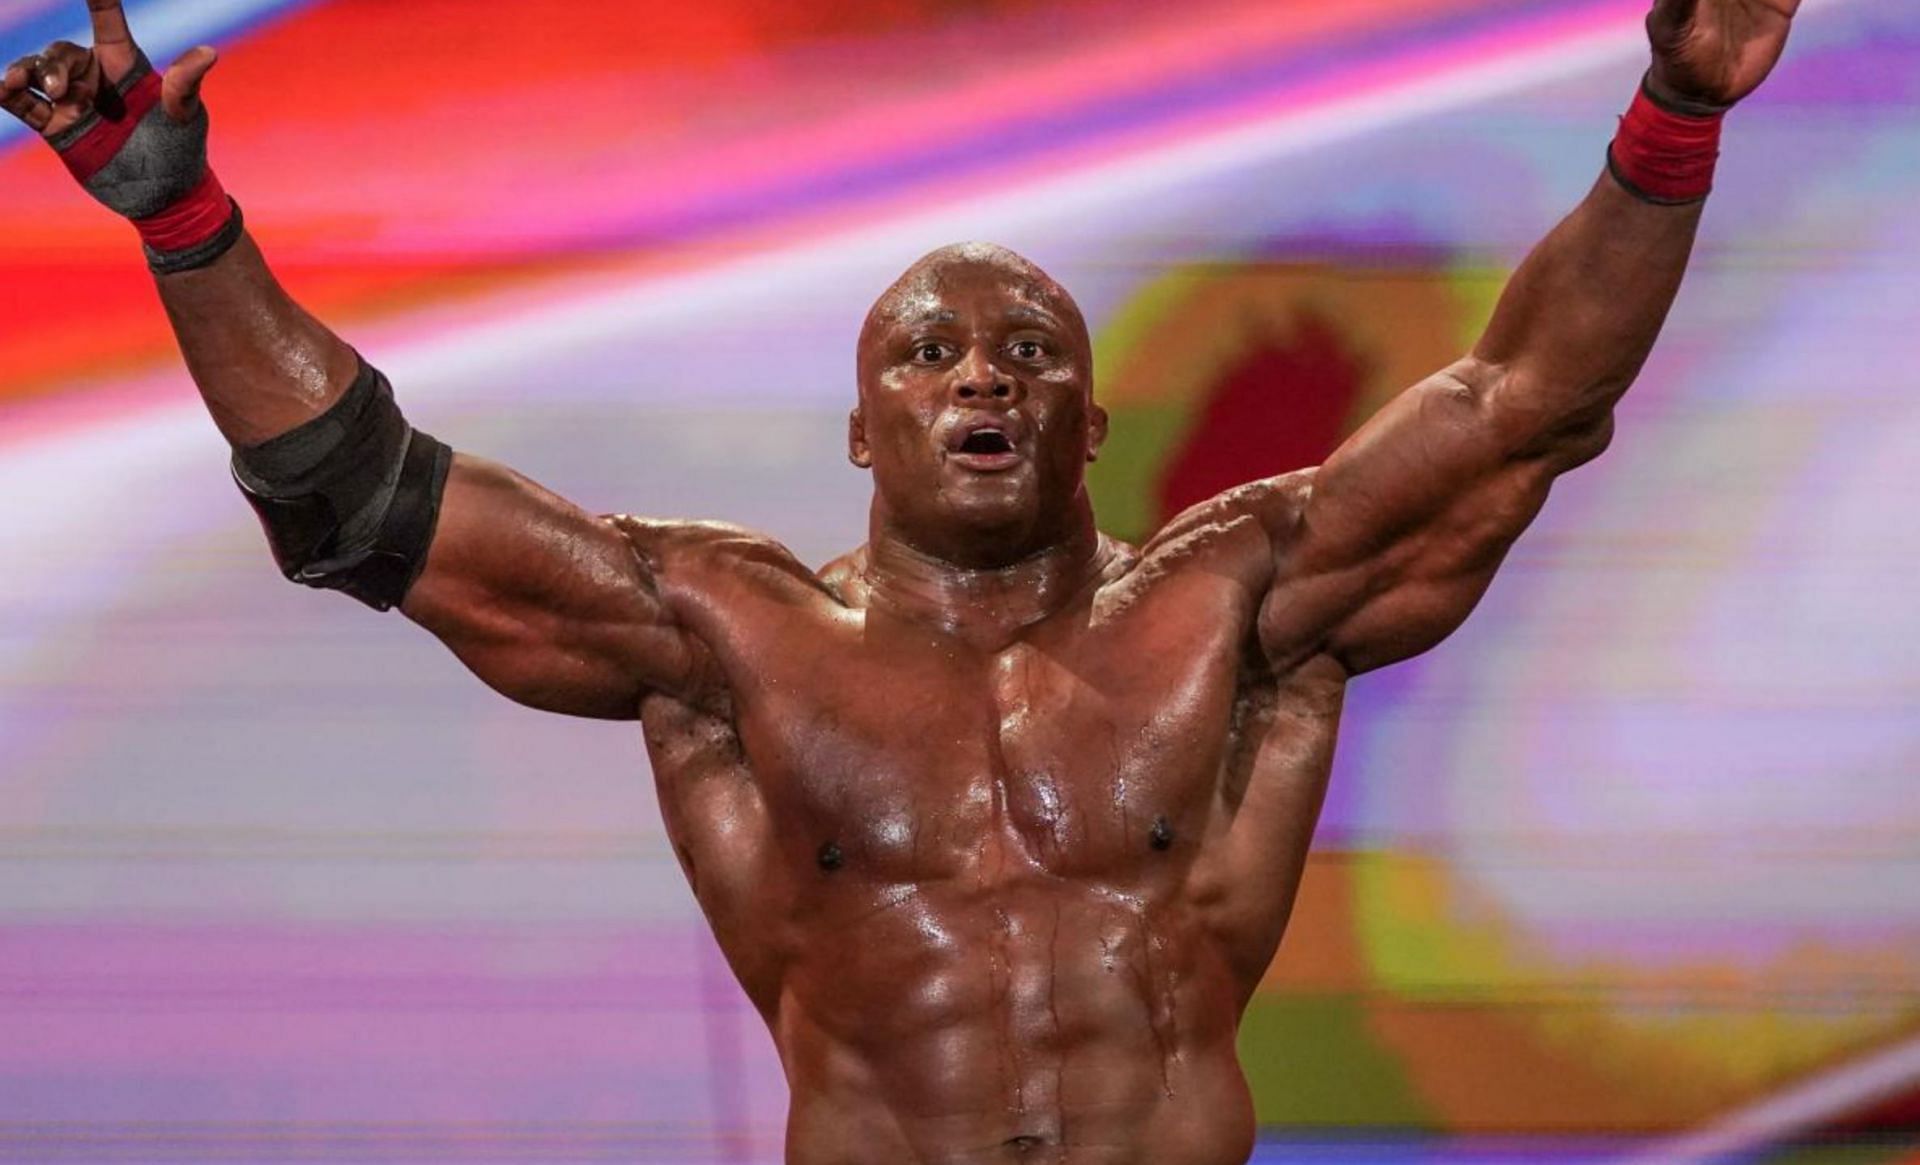 Bobby Lashley competed in a Steel Cage match